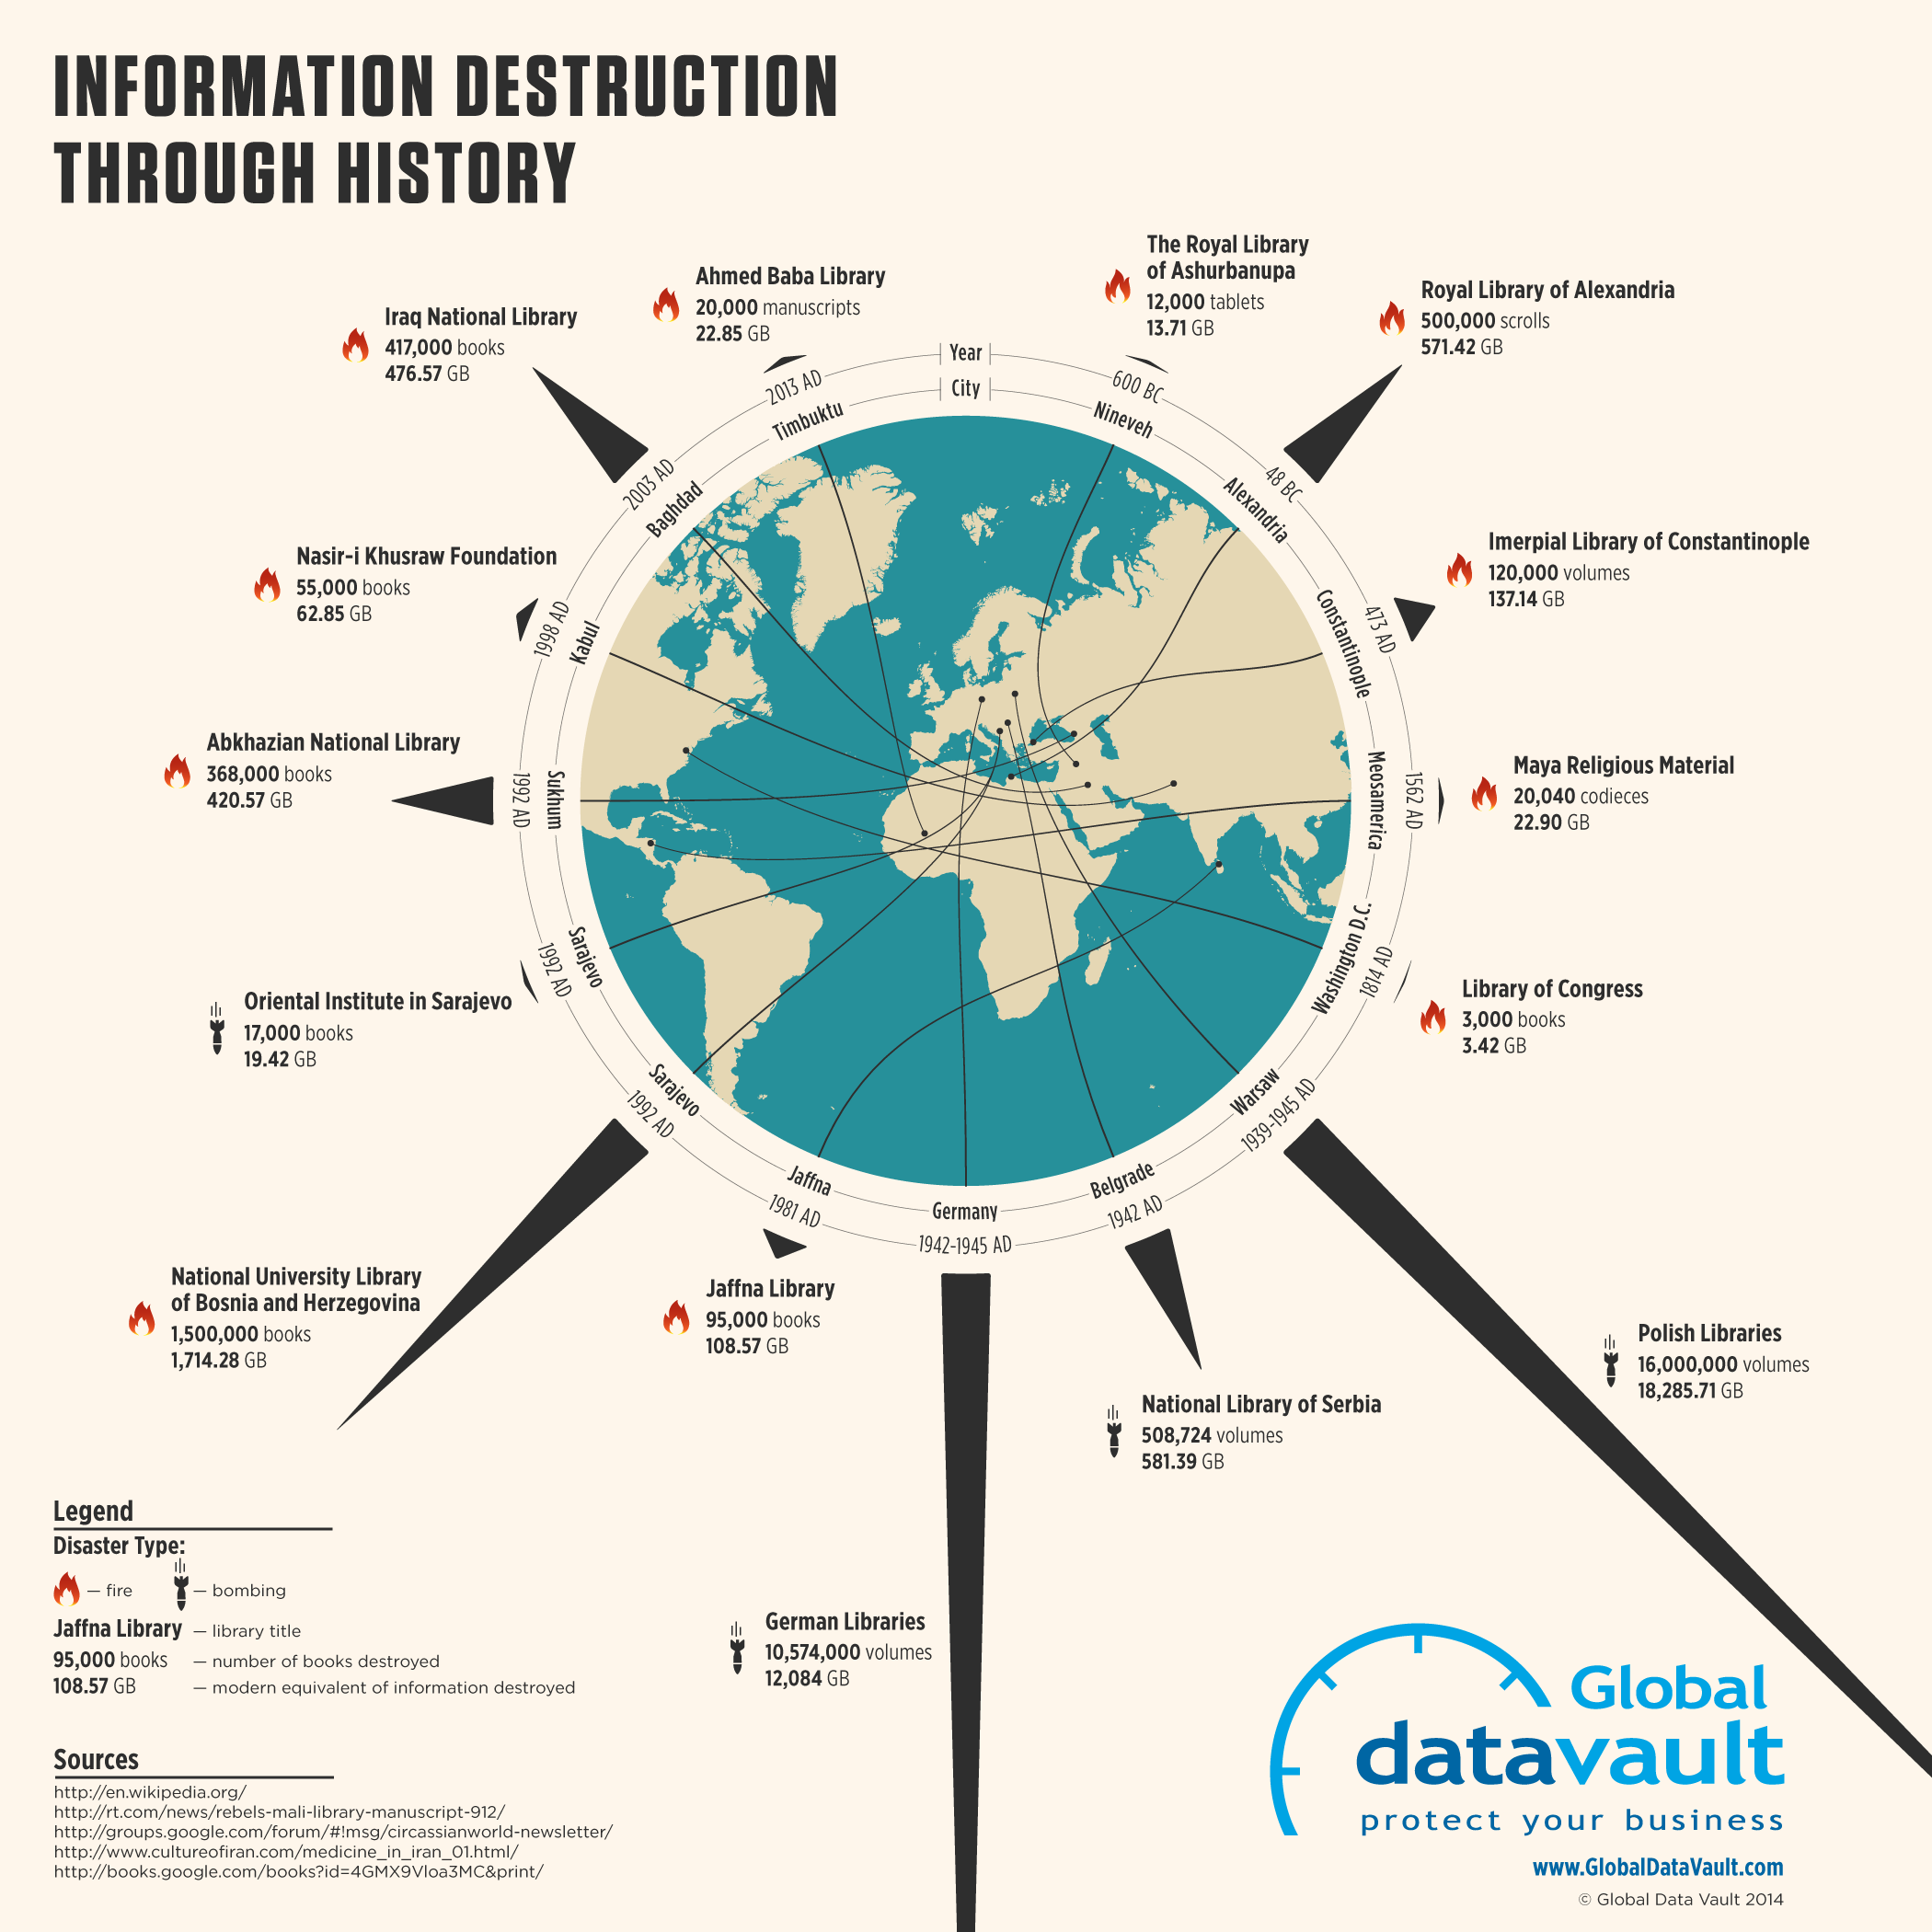 information history - Information Destruction Through History Armed Babe Ubrary Library Aseo Impolubray of Contok Ber National University Library Nation Library of Serbia Library Global datavault protect your business .com